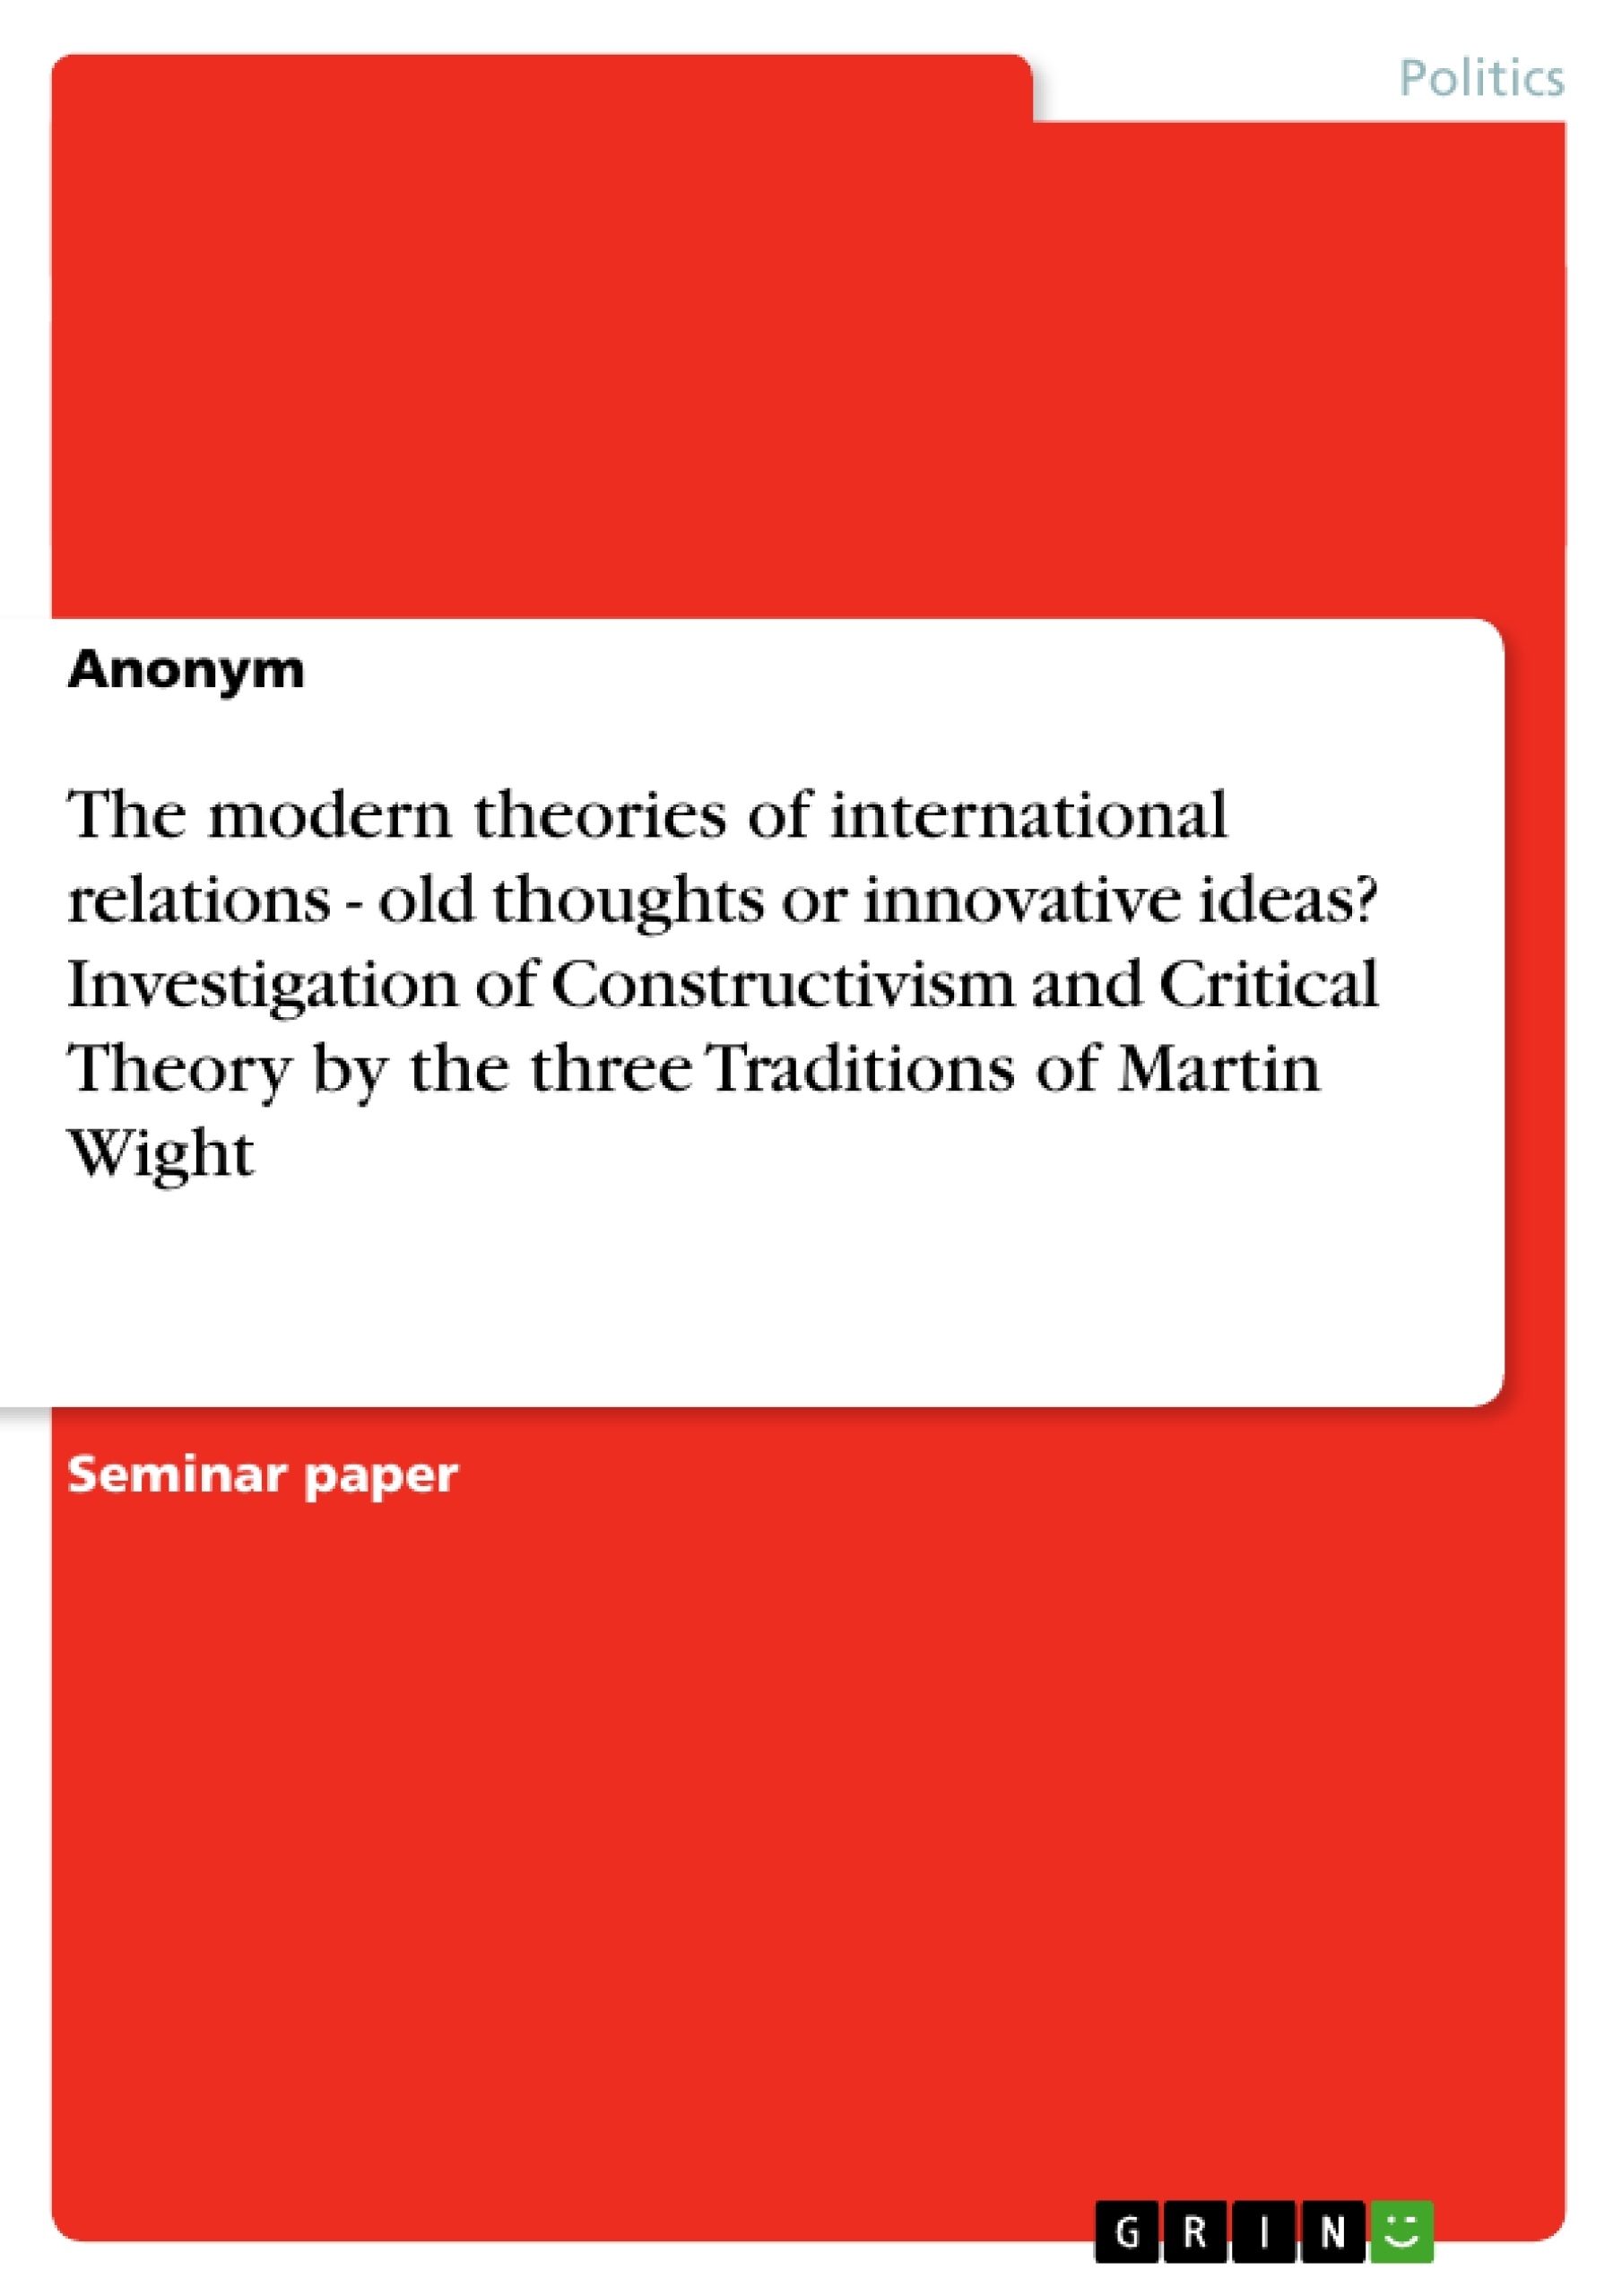 Title: The modern theories of international relations - old  thoughts or innovative ideas? Investigation of Constructivism and Critical Theory  by the three Traditions of Martin Wight